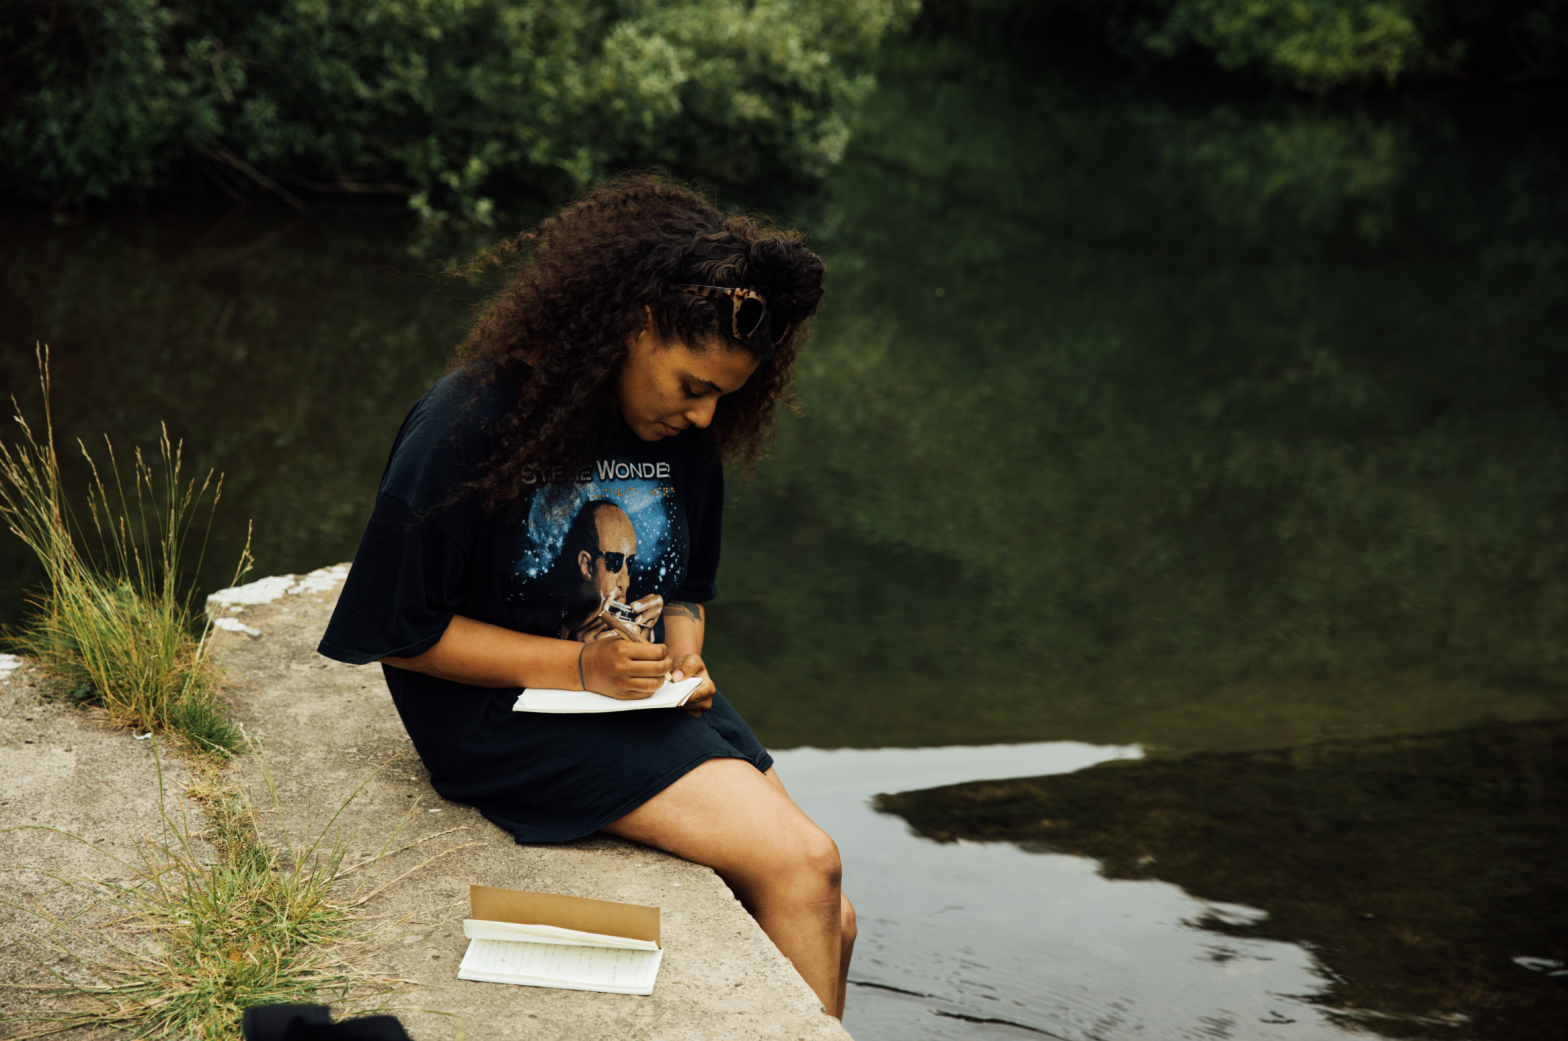 A photograph showing Evie Muir seated on the edge of a river or lake, her feet dangling in the dark water as she is bent over a notebook, pen in hand. She is wearing a t-shirt with Stevie Wonder on it and has sunglasses pushed up onto her head.